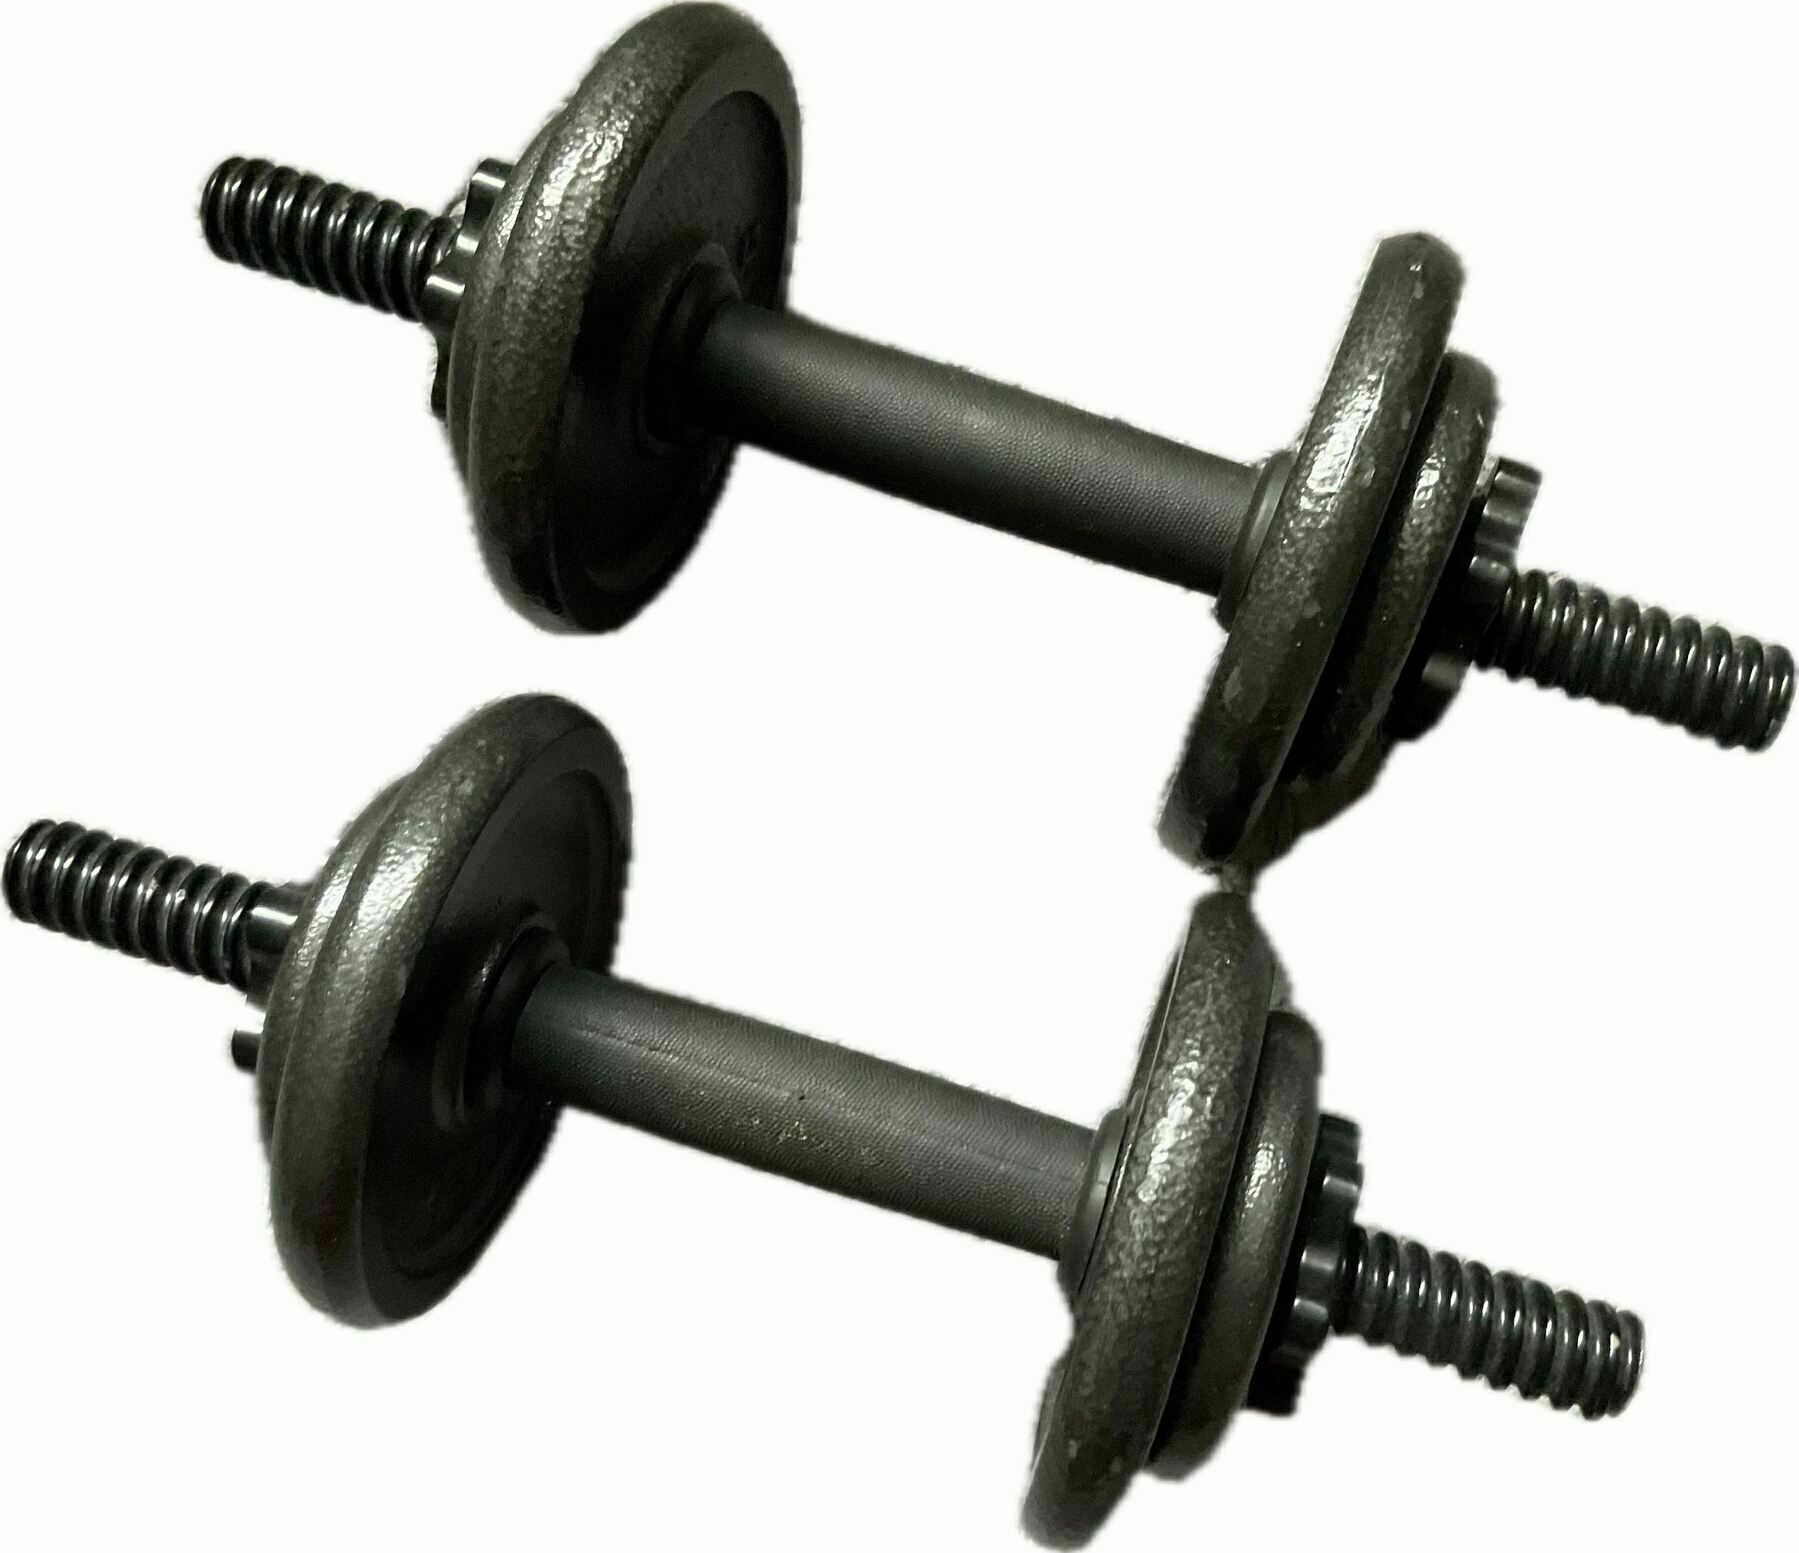 A pair of black dumbell weights on a white background.